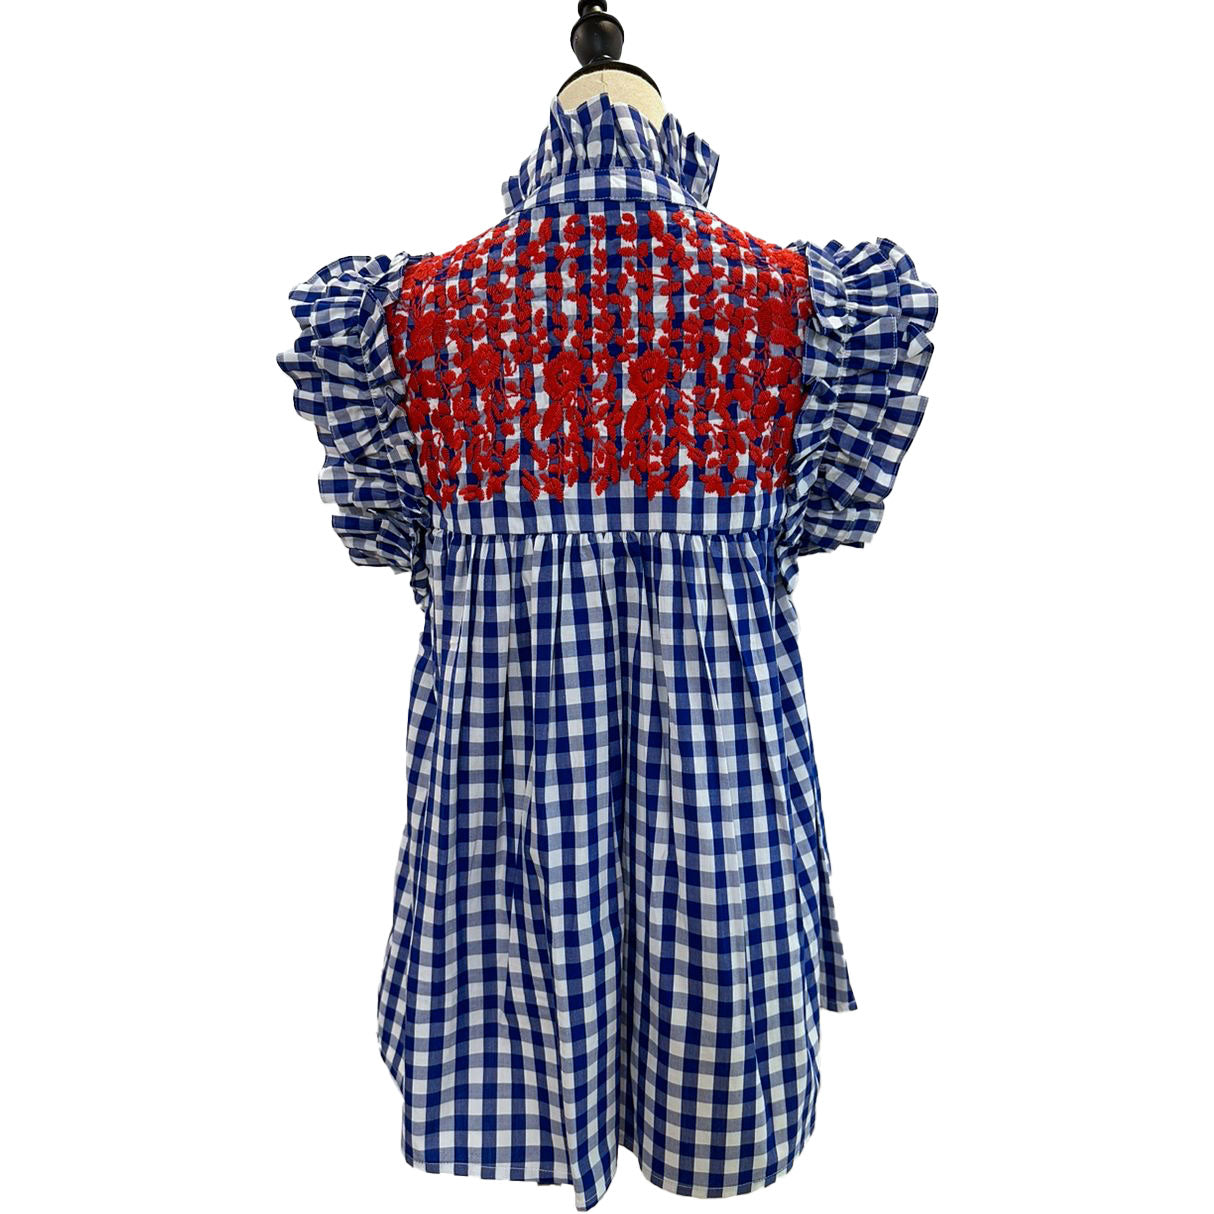 PRE-ORDER: Fourth of July Buffalo Check Hummingbird Blouse (shipping first week of June)